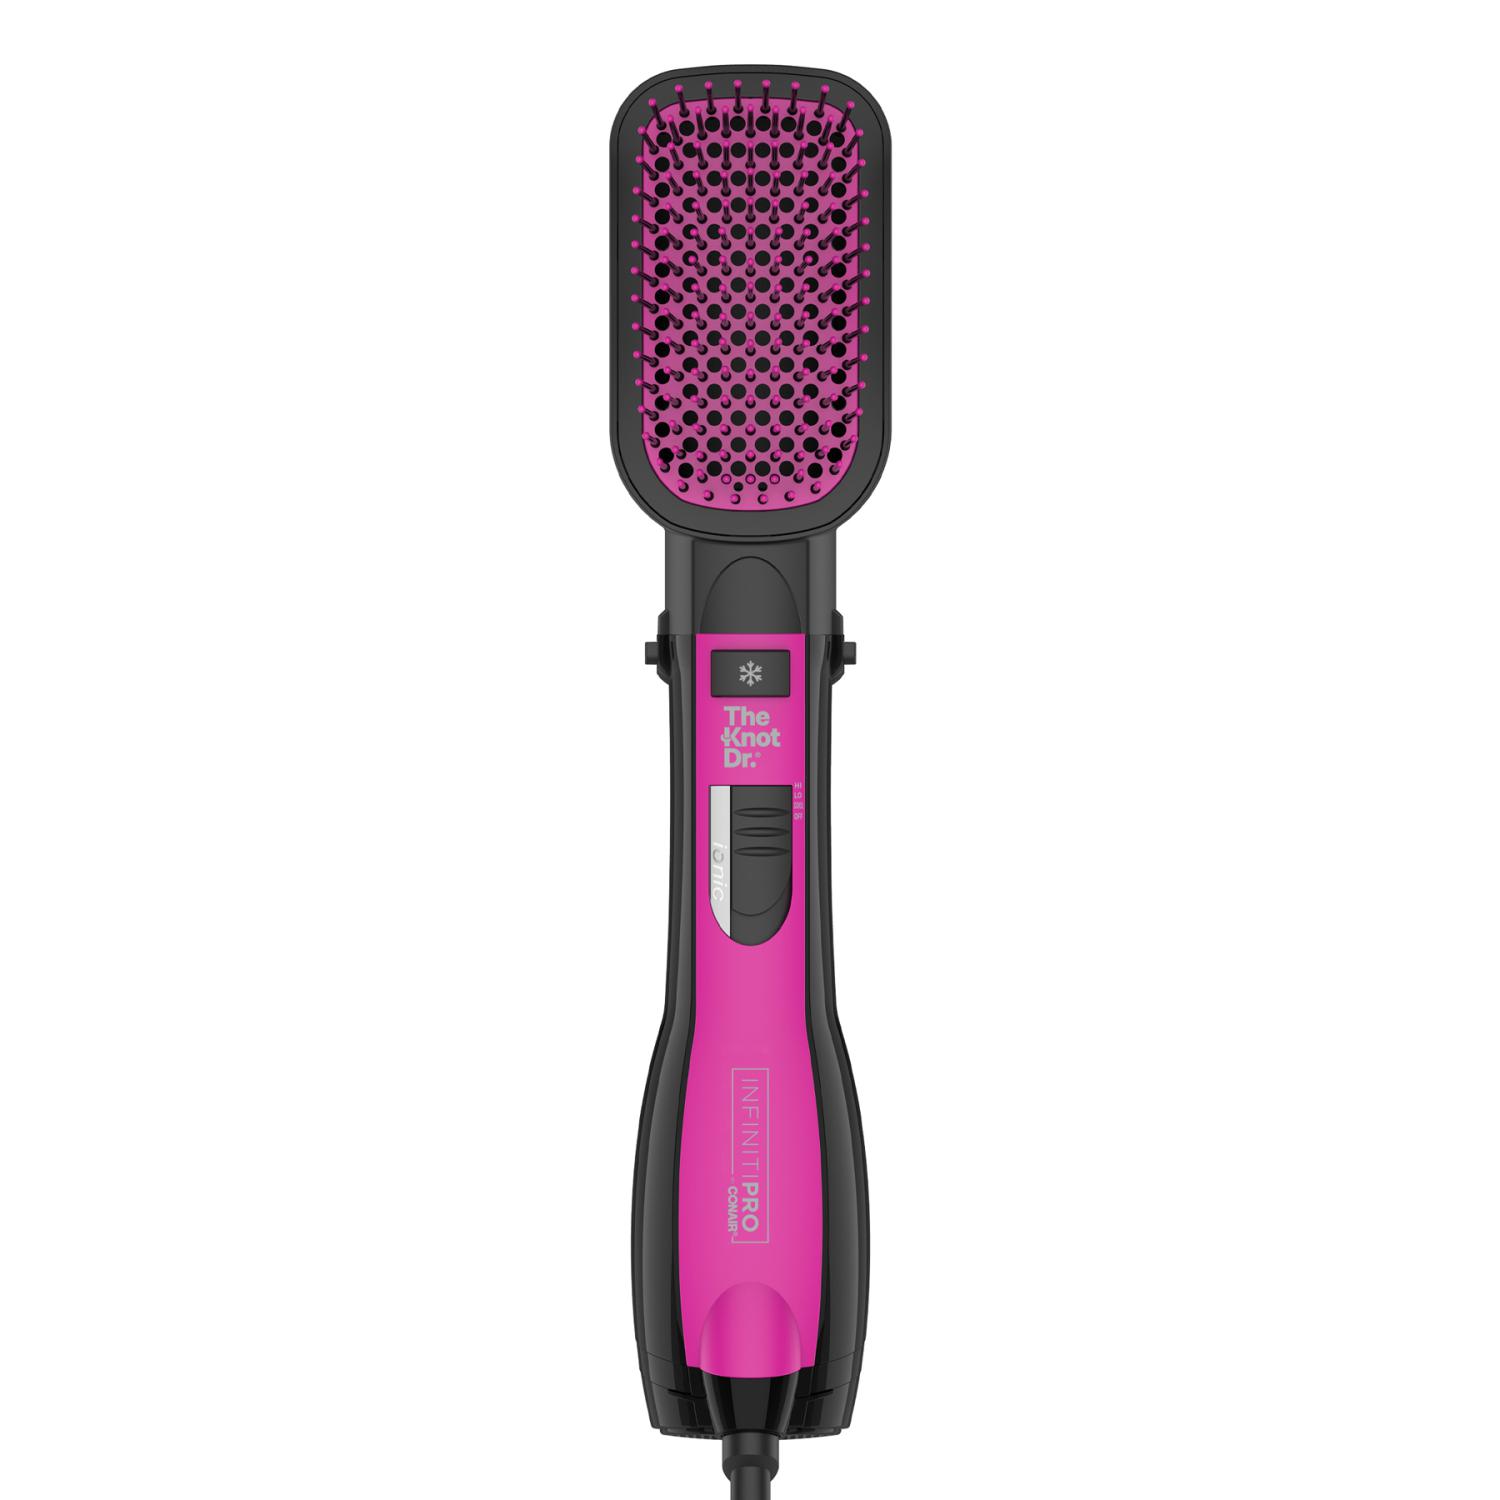 InfinitiPRO By Conair The Knot Dr. All-in-One Smoothing Dryer Brush , CVS